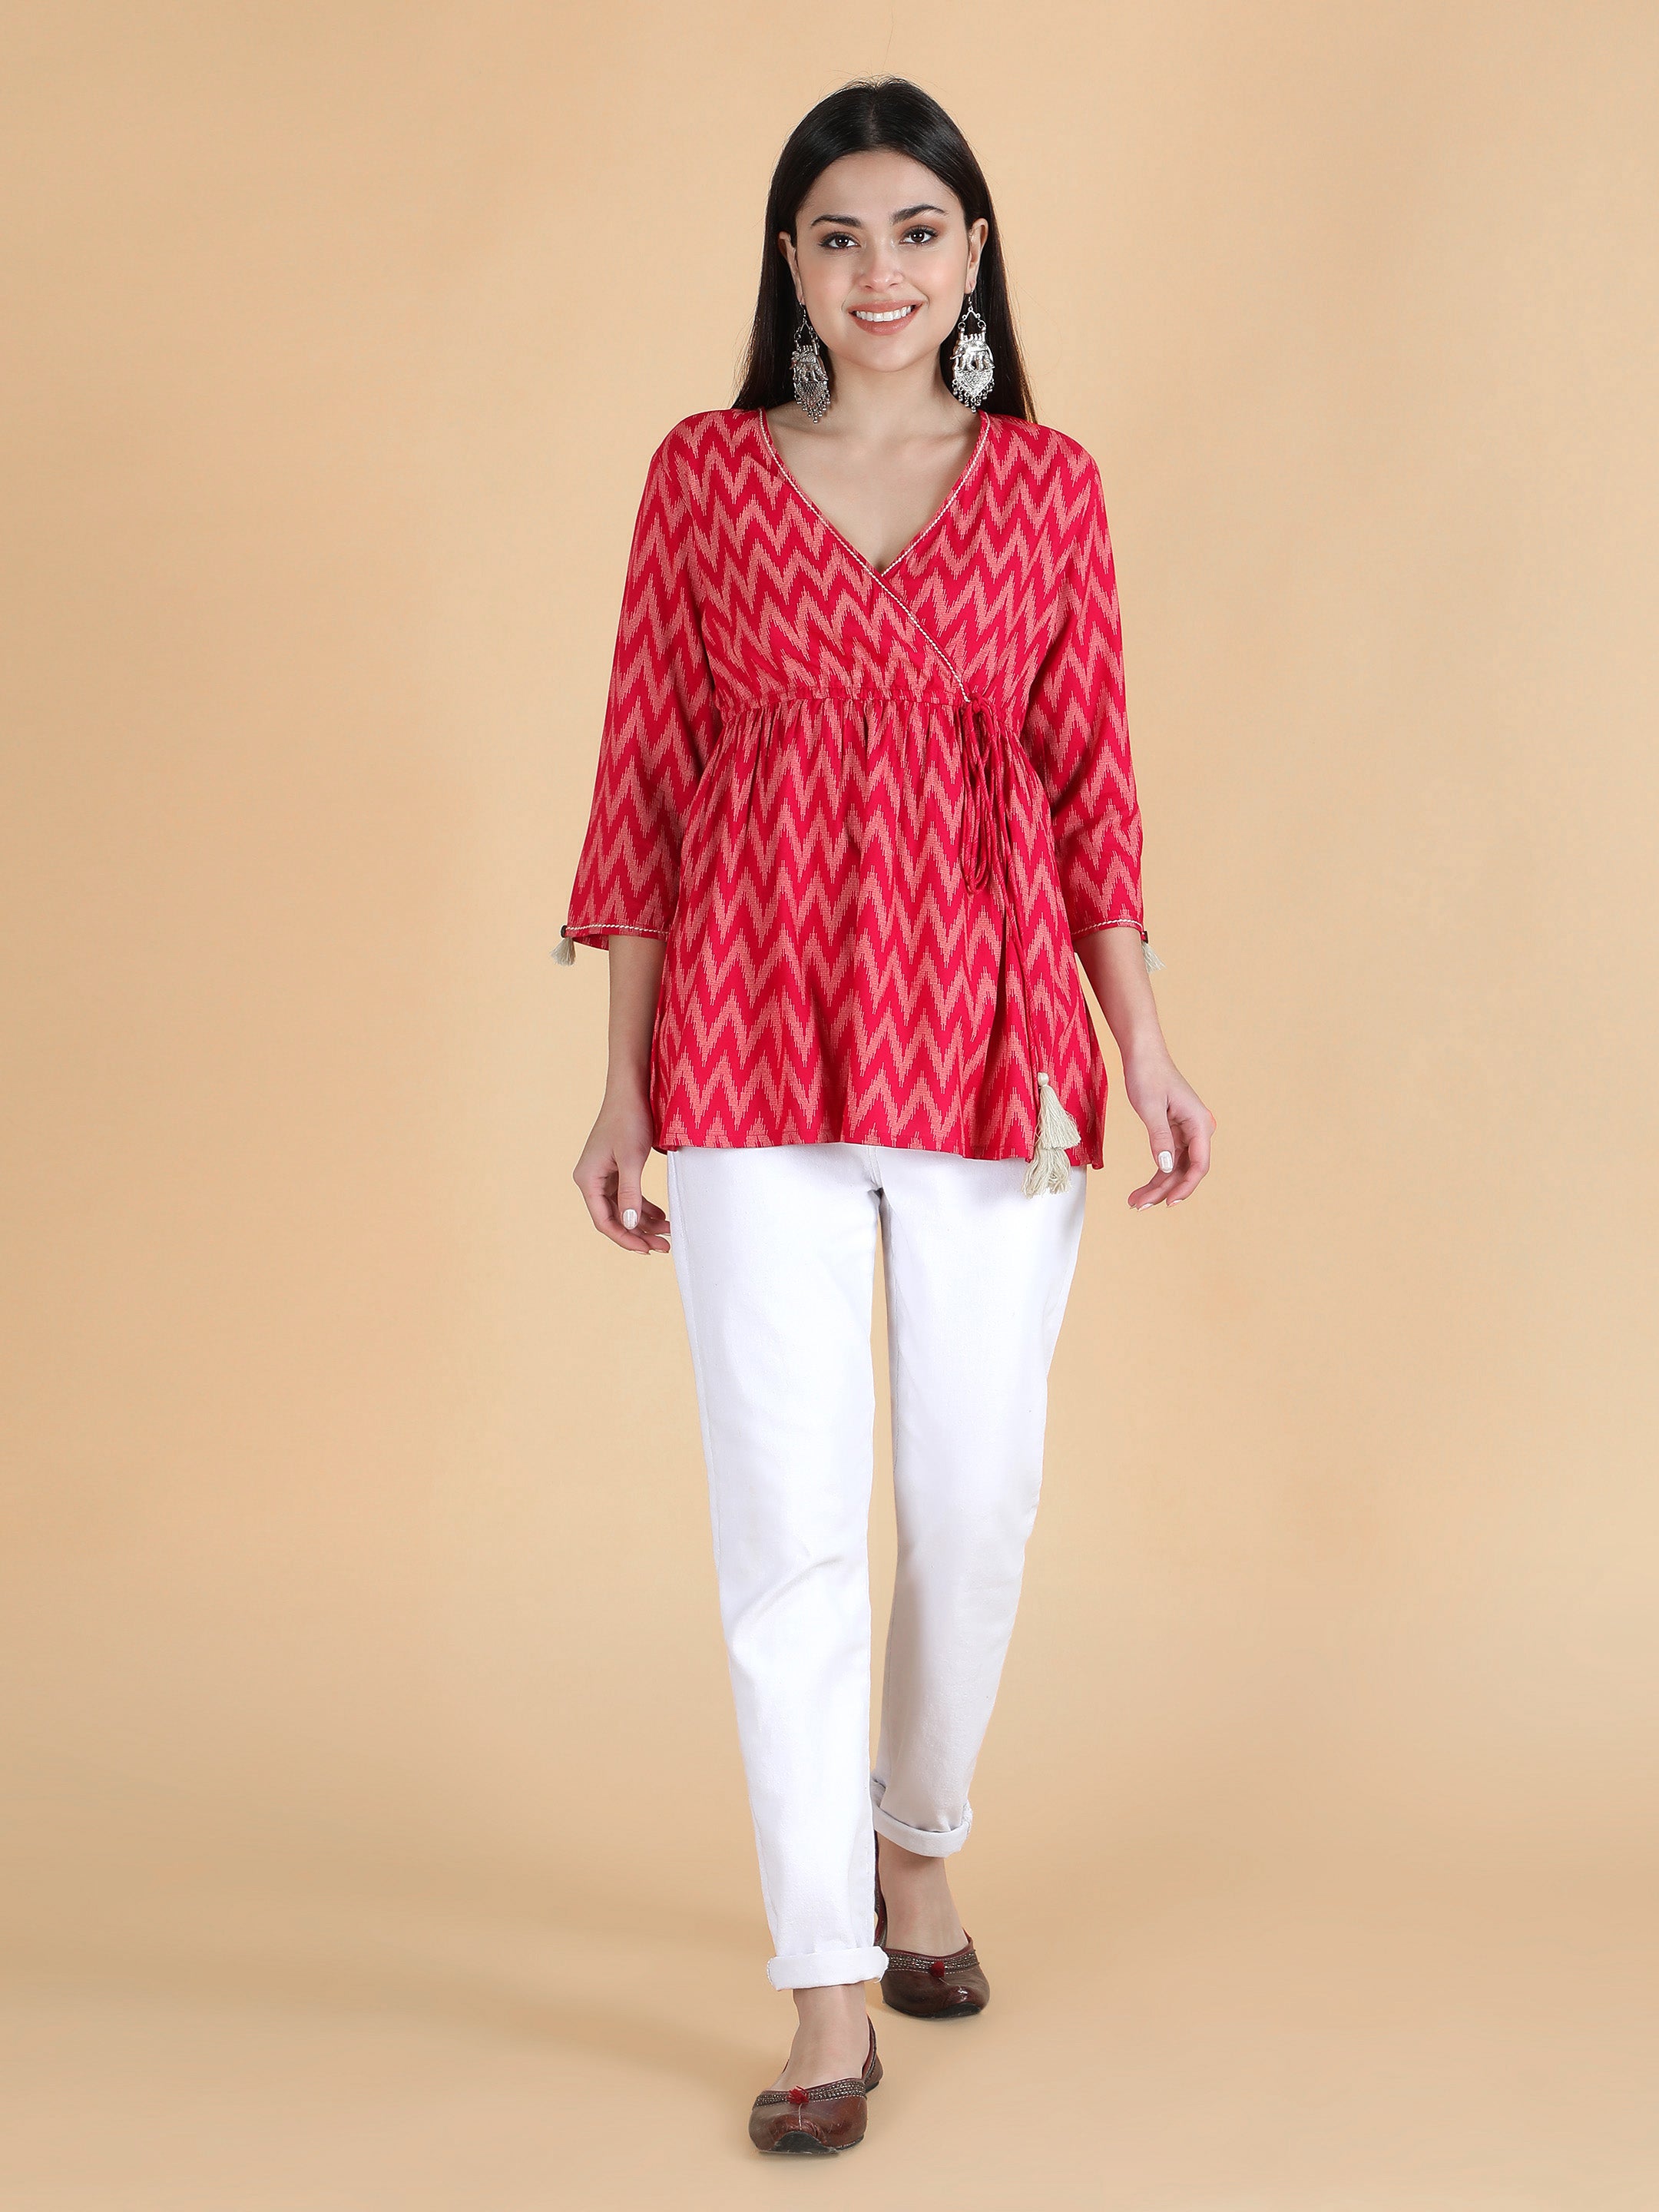 this-printed-angarkha-style-top-is-perfectly-fit-for-your-wardrobe-and-this-is-made-in-rayon-fabric-with-some-details-on-it-these-apparels-are-very-stylish-and-comfortable-too-embellished-with-dori-and-3-4th-sleeves-top-length-is-above-knee